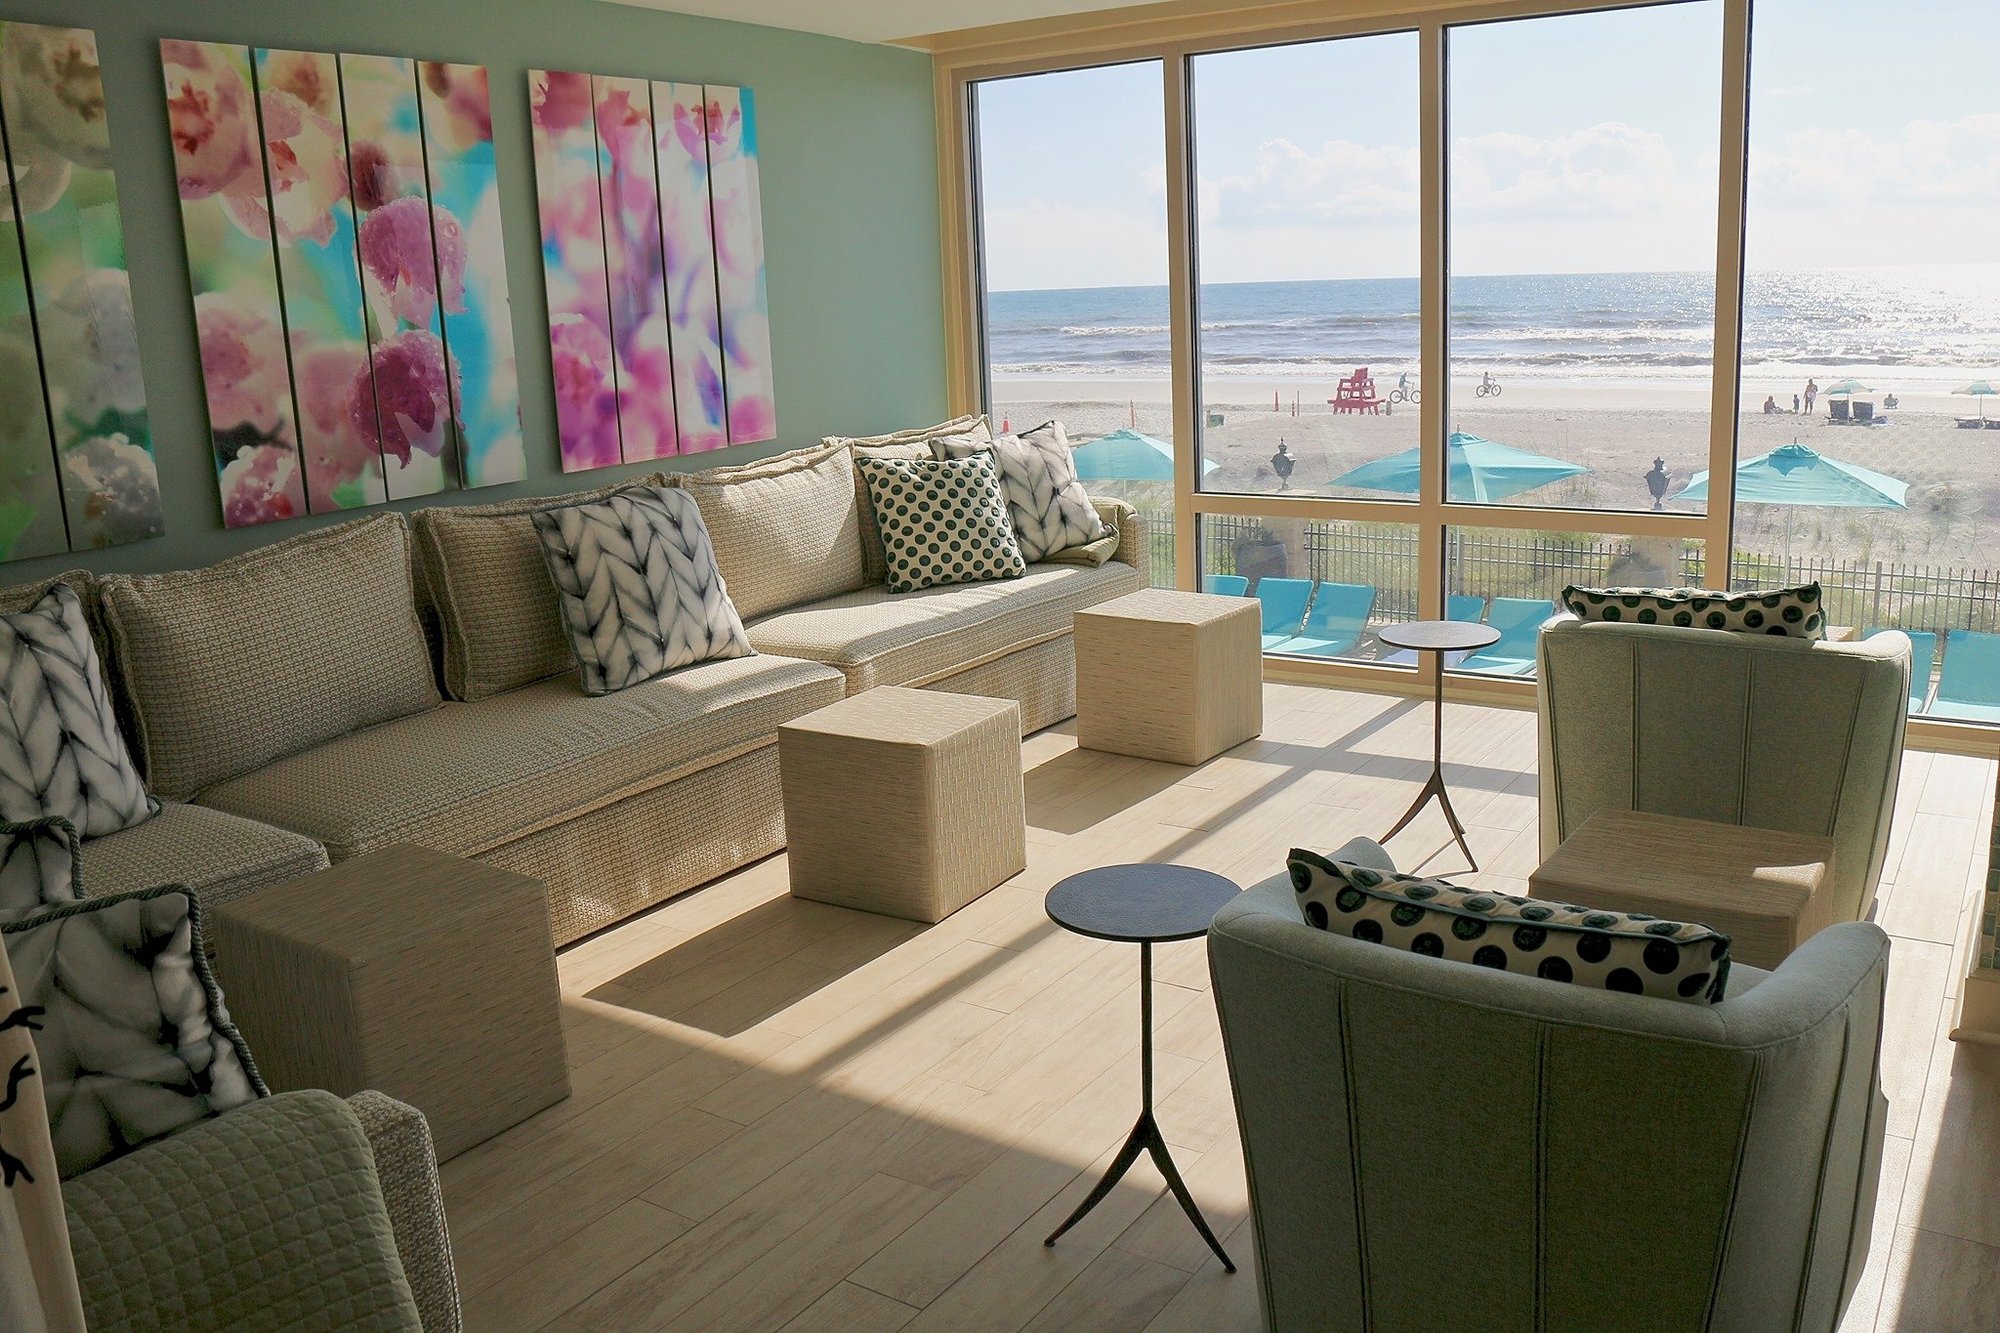 Jacksonville-FL-hotel-lounge-with-large-windows-viewing-ocean-with-large-cream-sofa